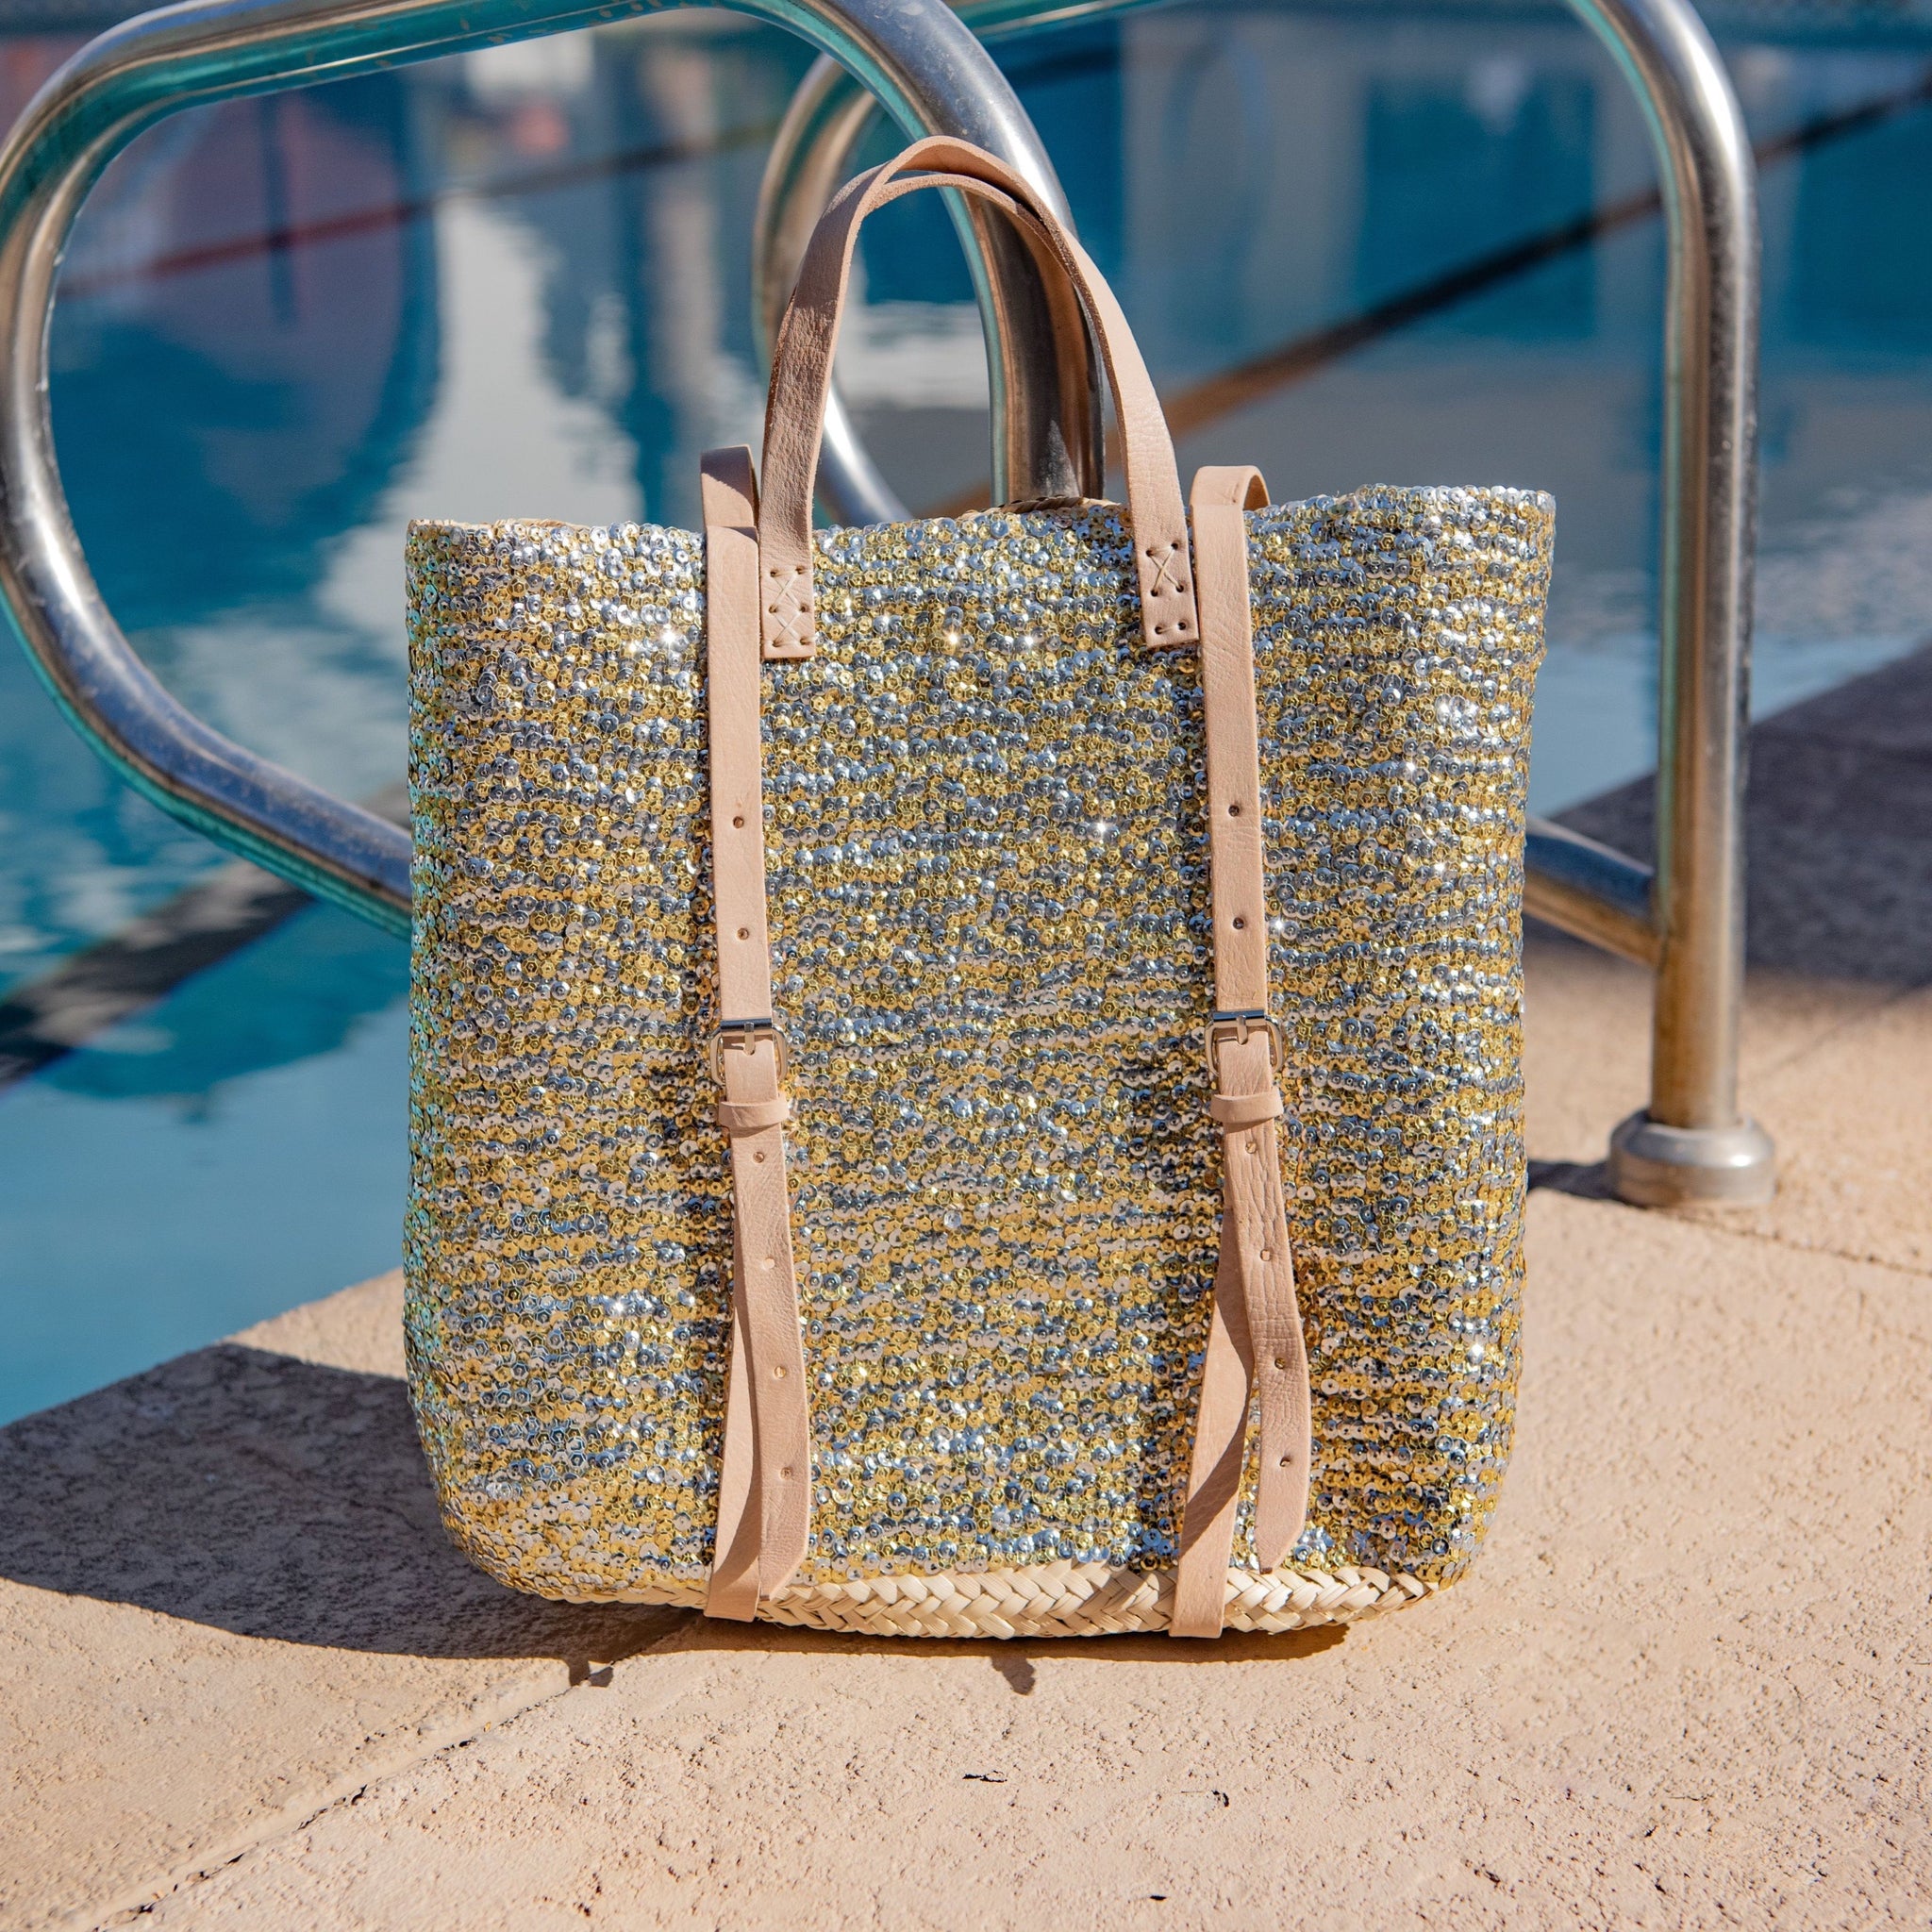 Straw Backpack with Silver and Gold Sequins sitting next to pool